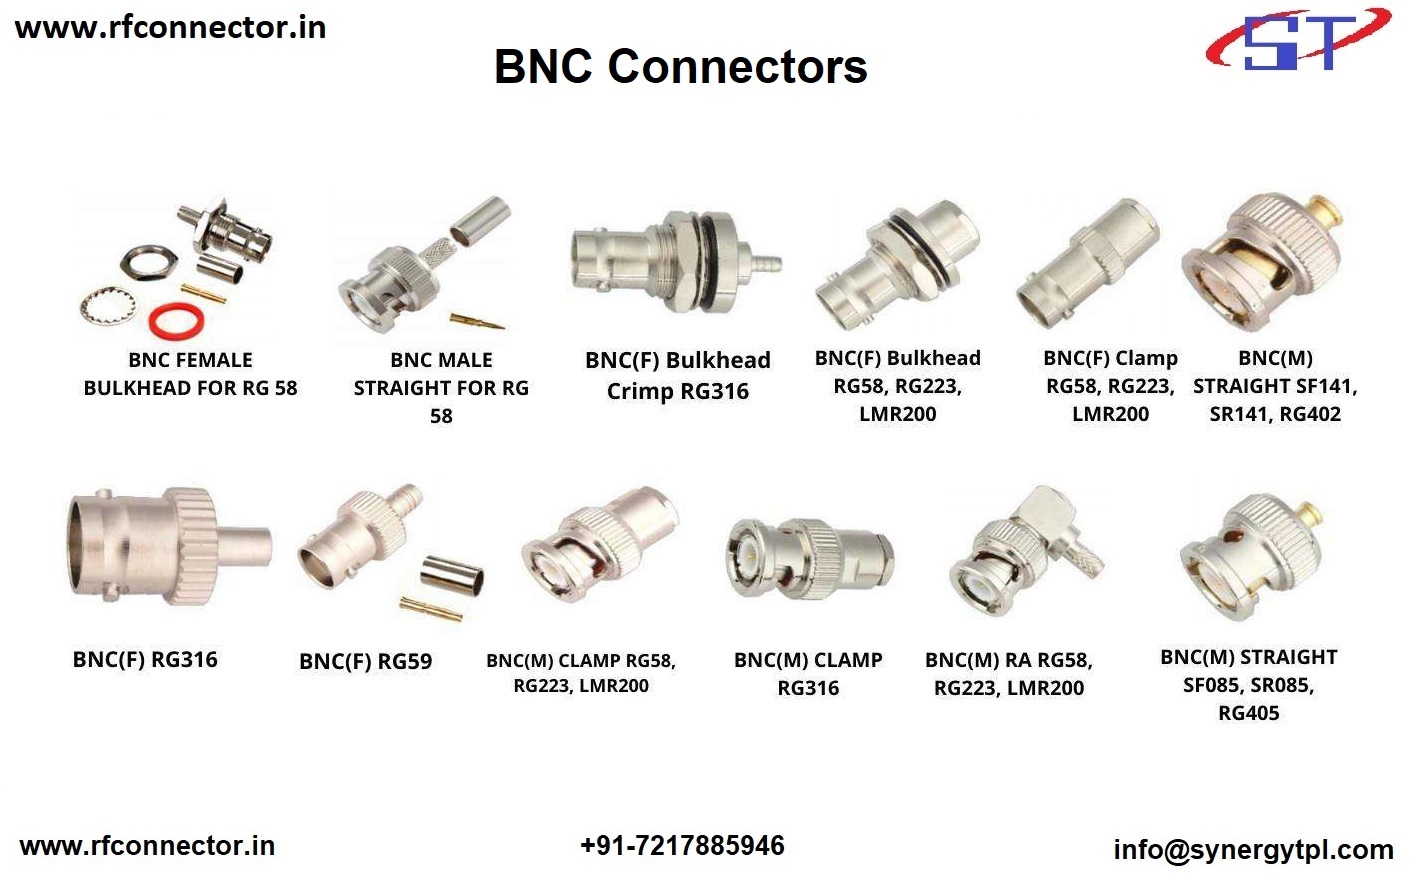 N Male Crimp Connector for LMR 240 cable